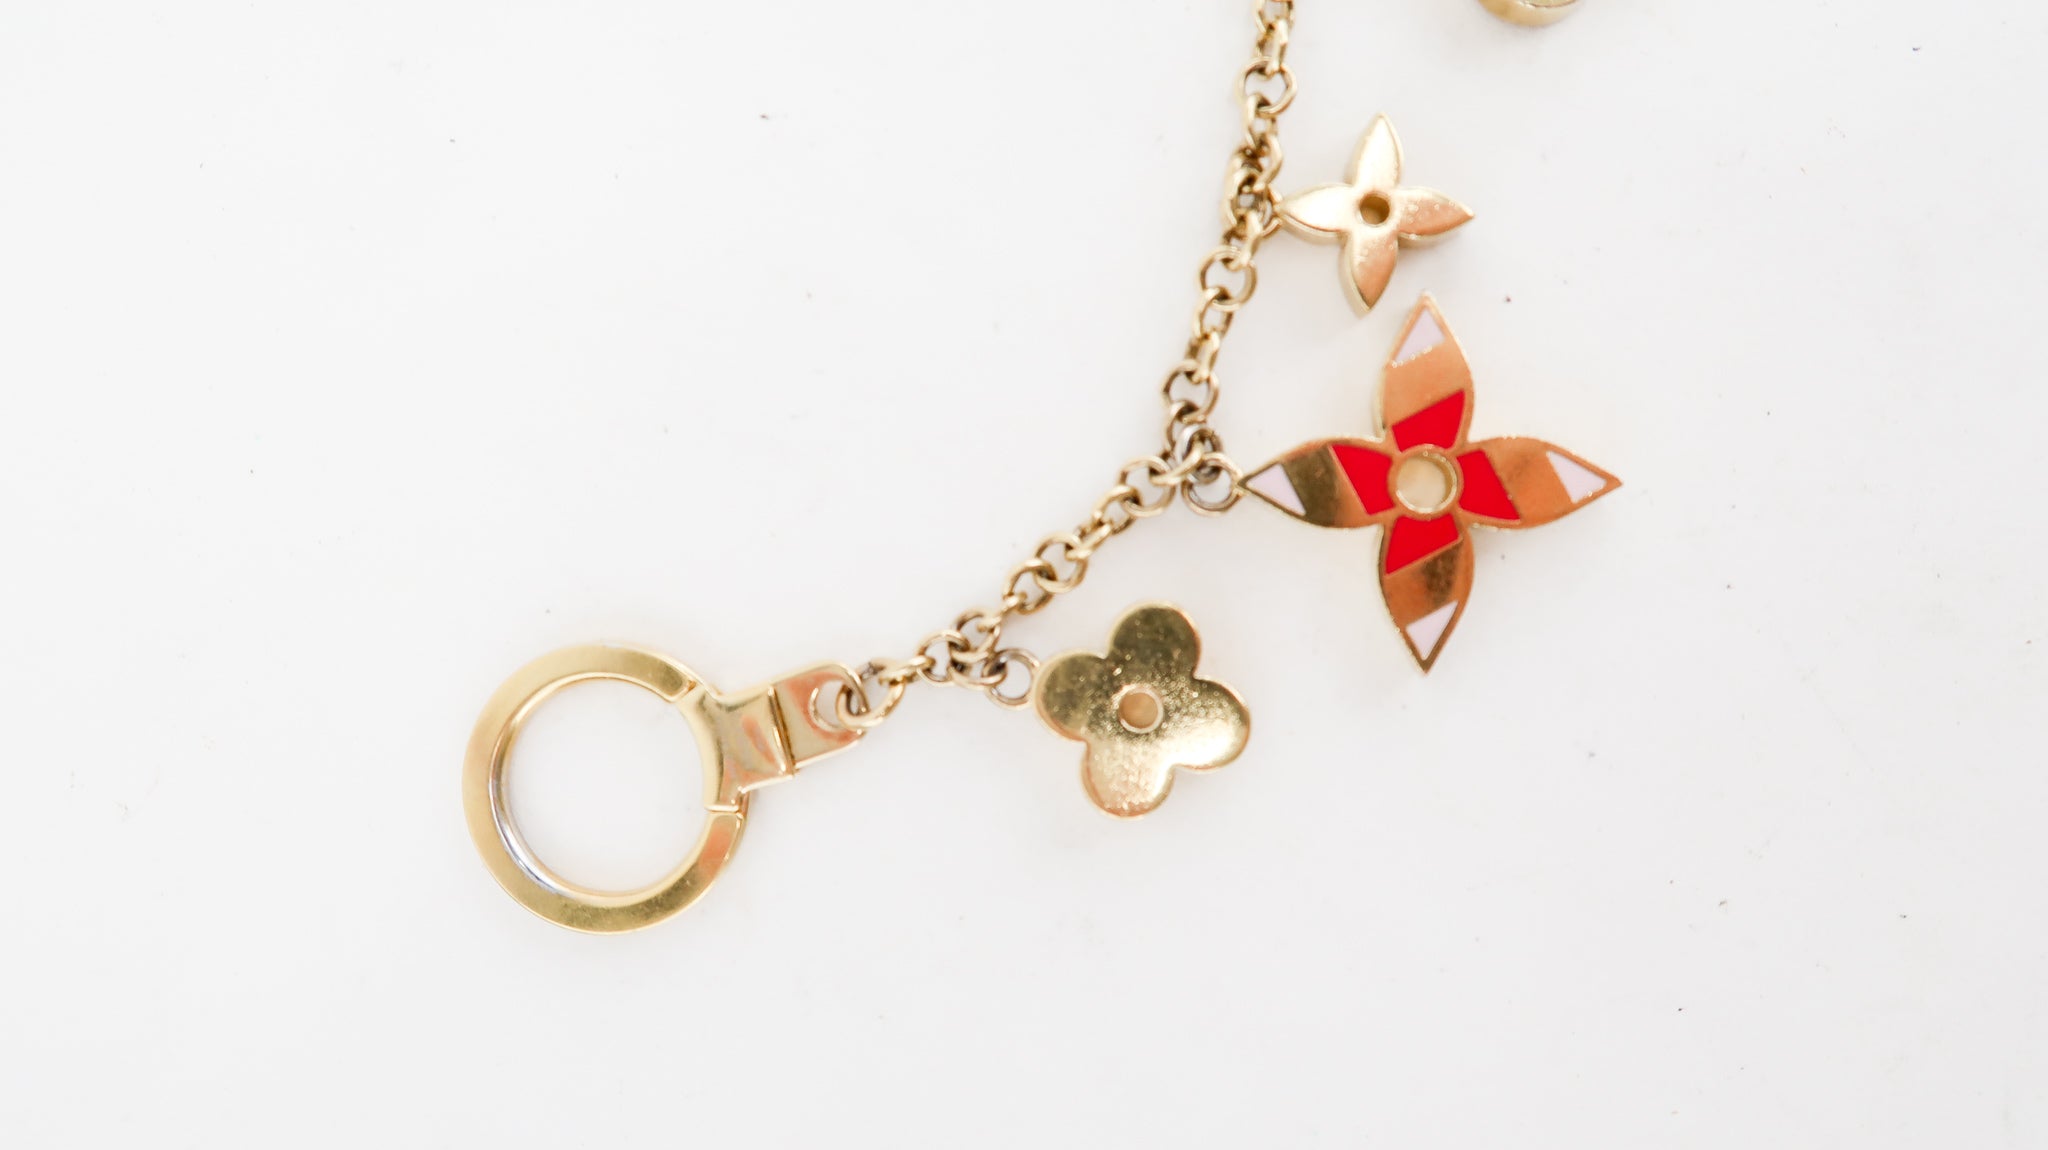 Gold & Multicolor Spring Street Chain Bag Charm